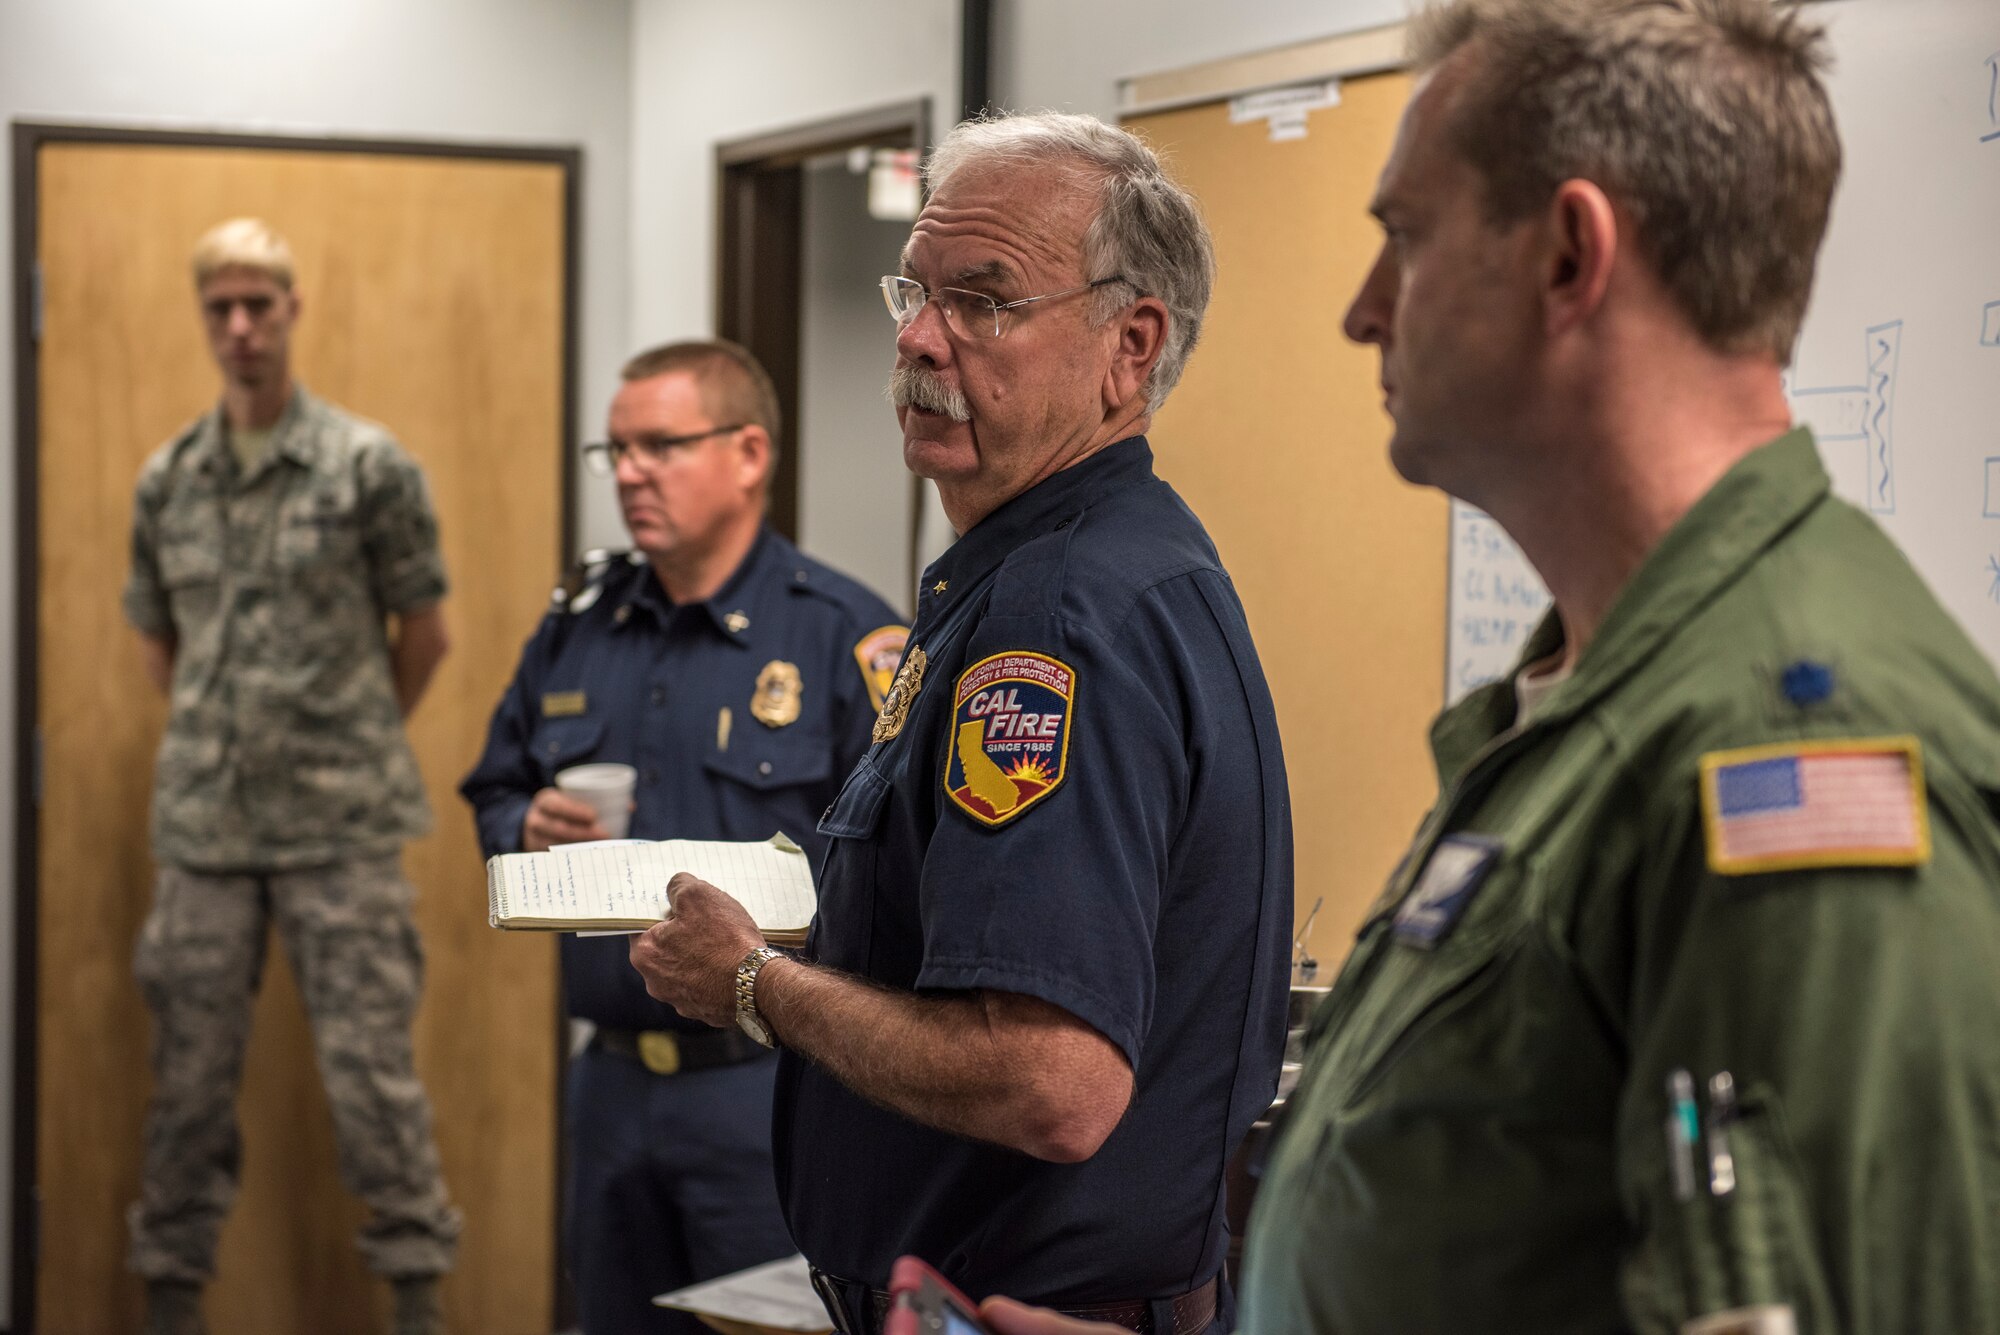 Cal Fire coordinators and the 146th Airlift Wing mission commander brief C-130J pilots and crews at Channel Islands Air National Guard Base in Port Hueneme, California, Dec. 10, 2017, for aerial operations to contain the Thomas Fire burning across Ventura and Santa Barbara Counties. The aircraft carry the Modular Airborne Fire Fighting System to drop fire suppression chemicals across the path of the wildfire to slow and contain the flames. (U.S. Air Force photo by J.M. Eddins Jr.)